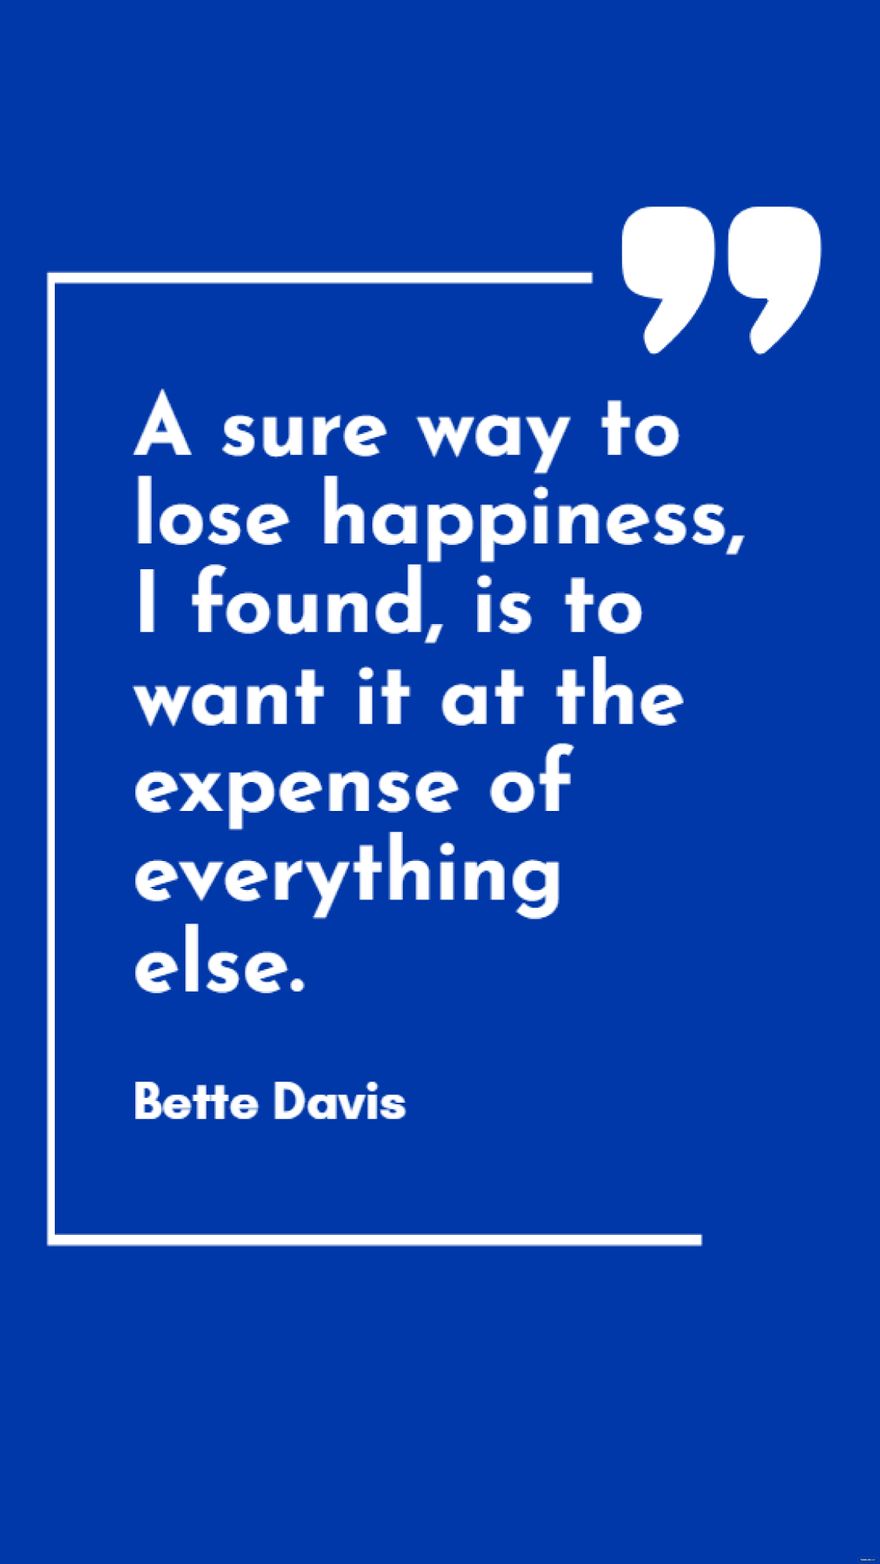 Bette Davis - A sure way to lose happiness, I found, is to want it at the expense of everything else.